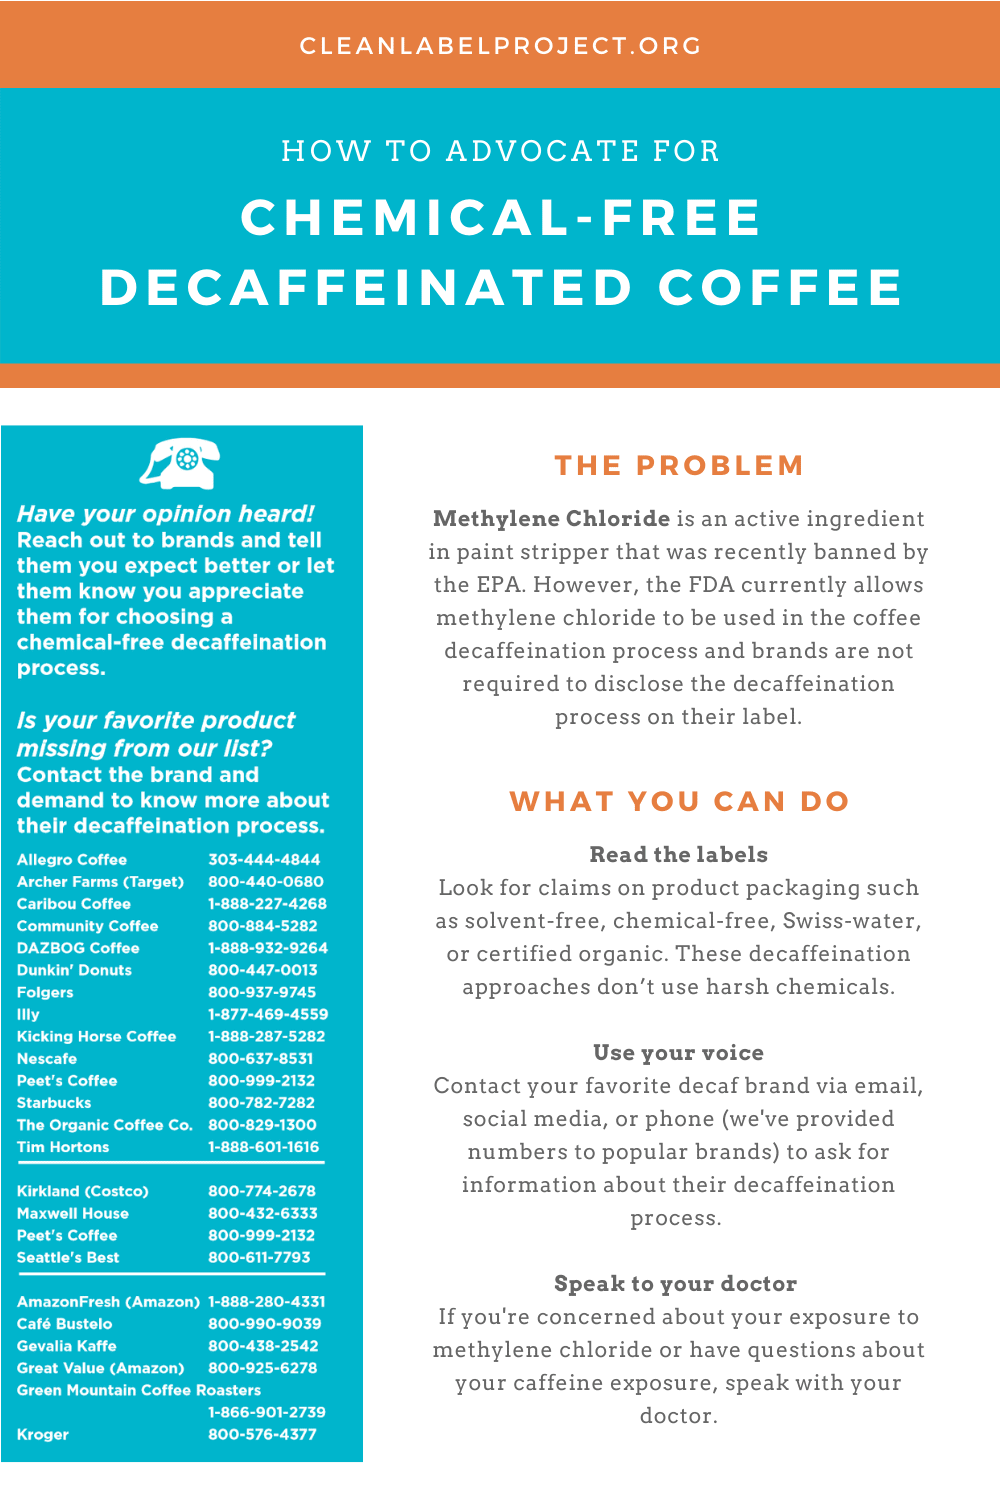 Is your decaf coffee safe?